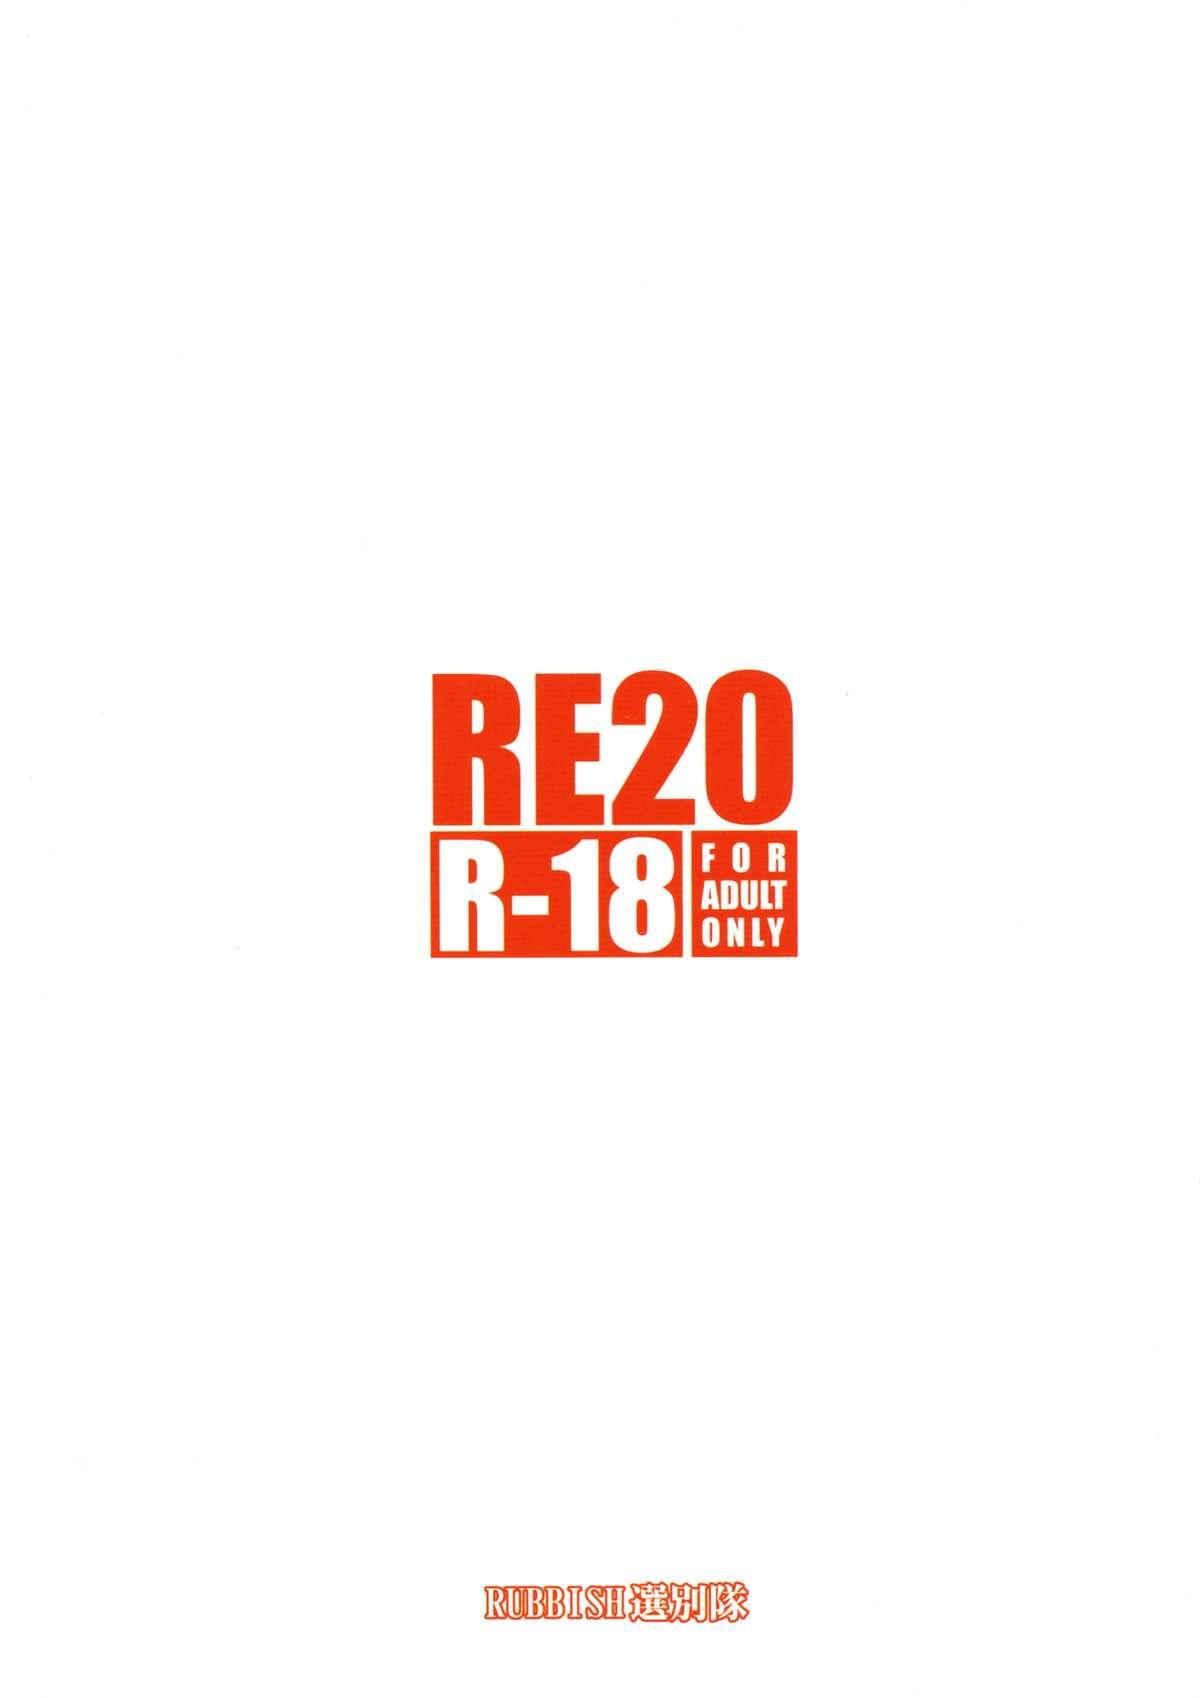 RE20 1